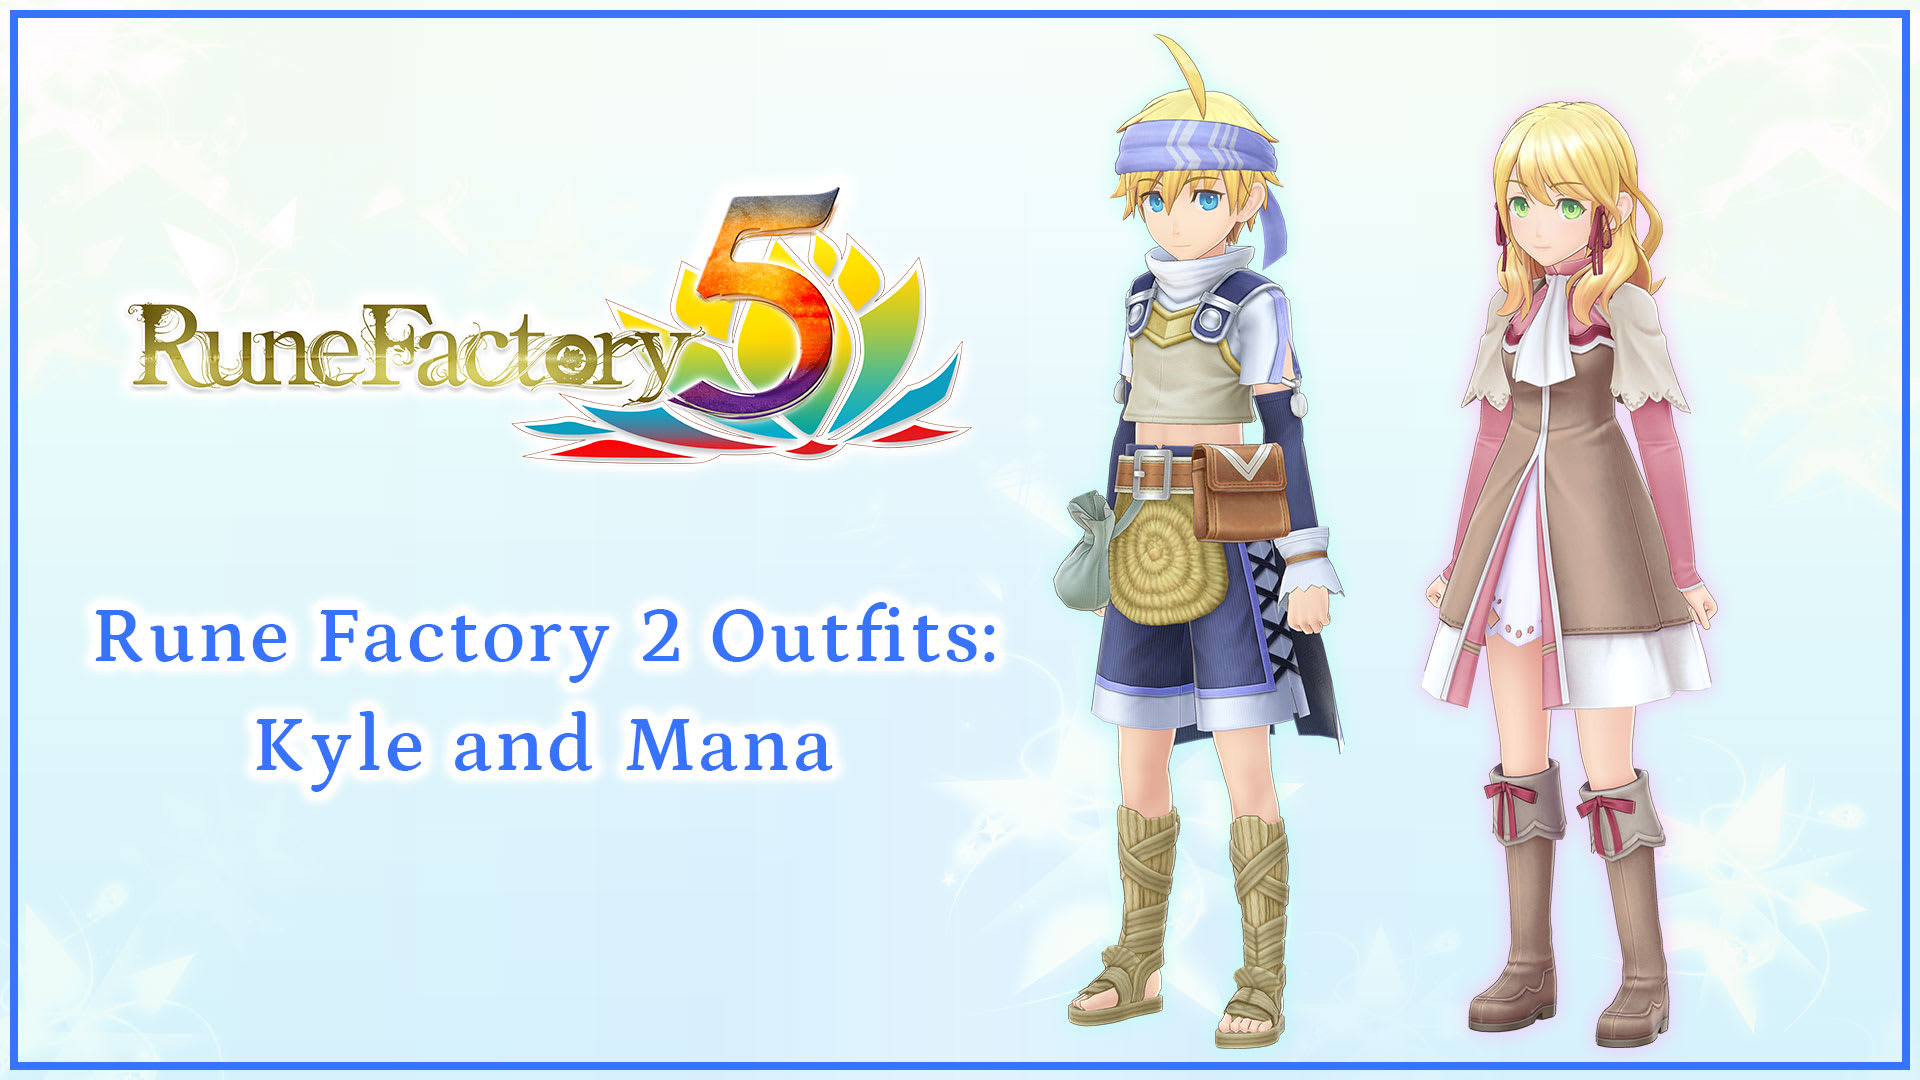 Rune Factory 2 Outfits: Kyle and Mana